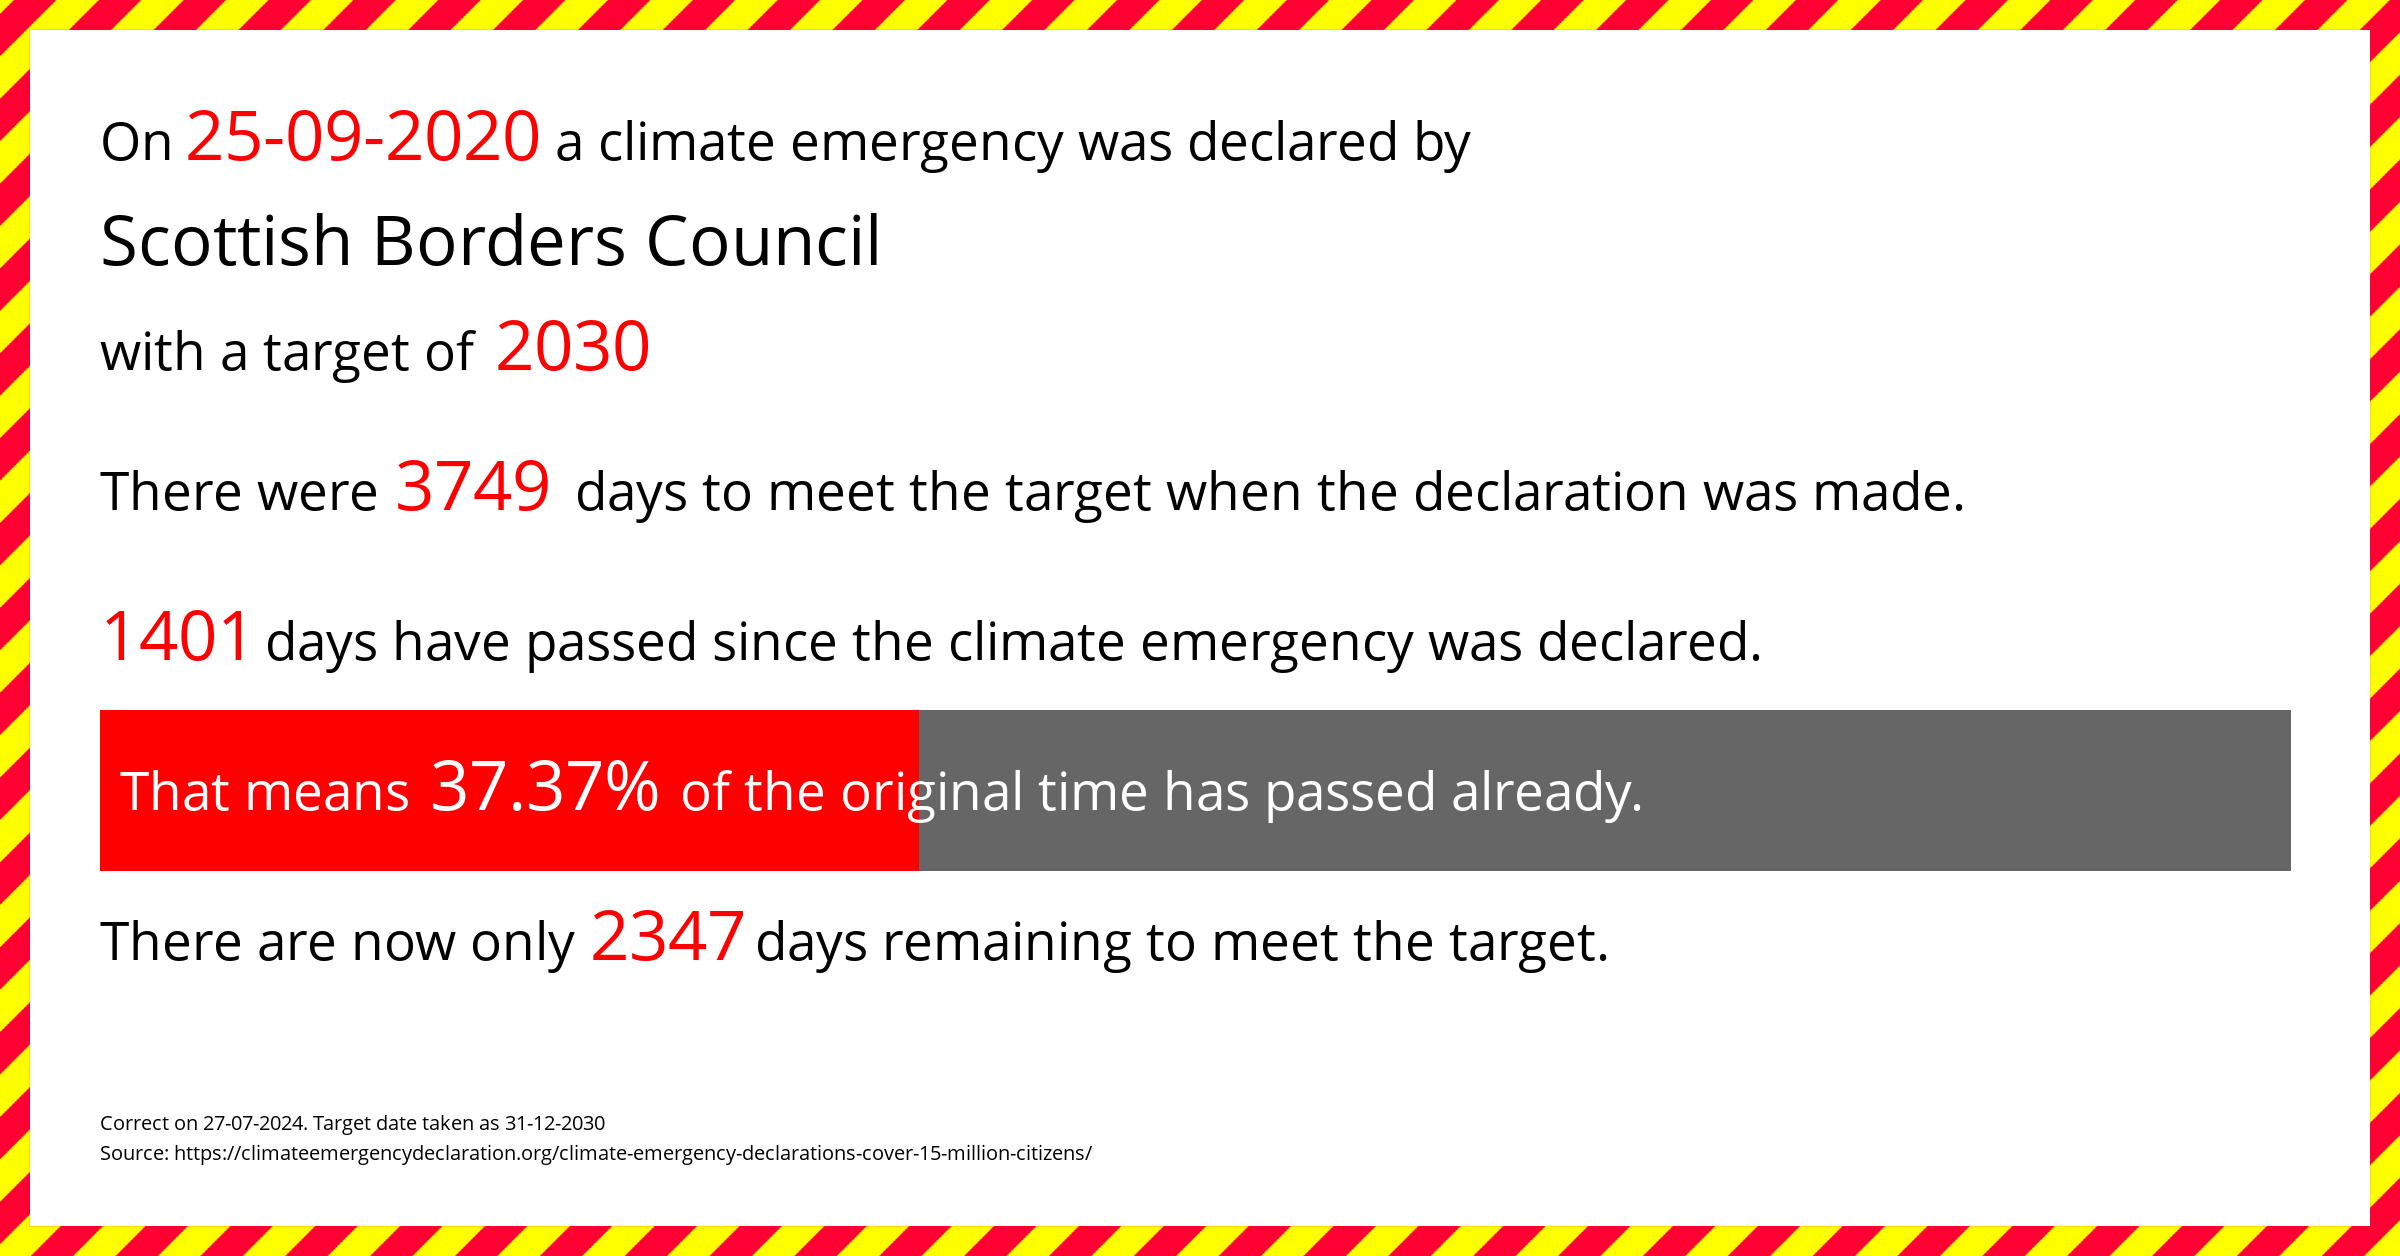 Scottish Borders Council  declared a Climate emergency on Friday 25th September 2020, with a target of 2030.